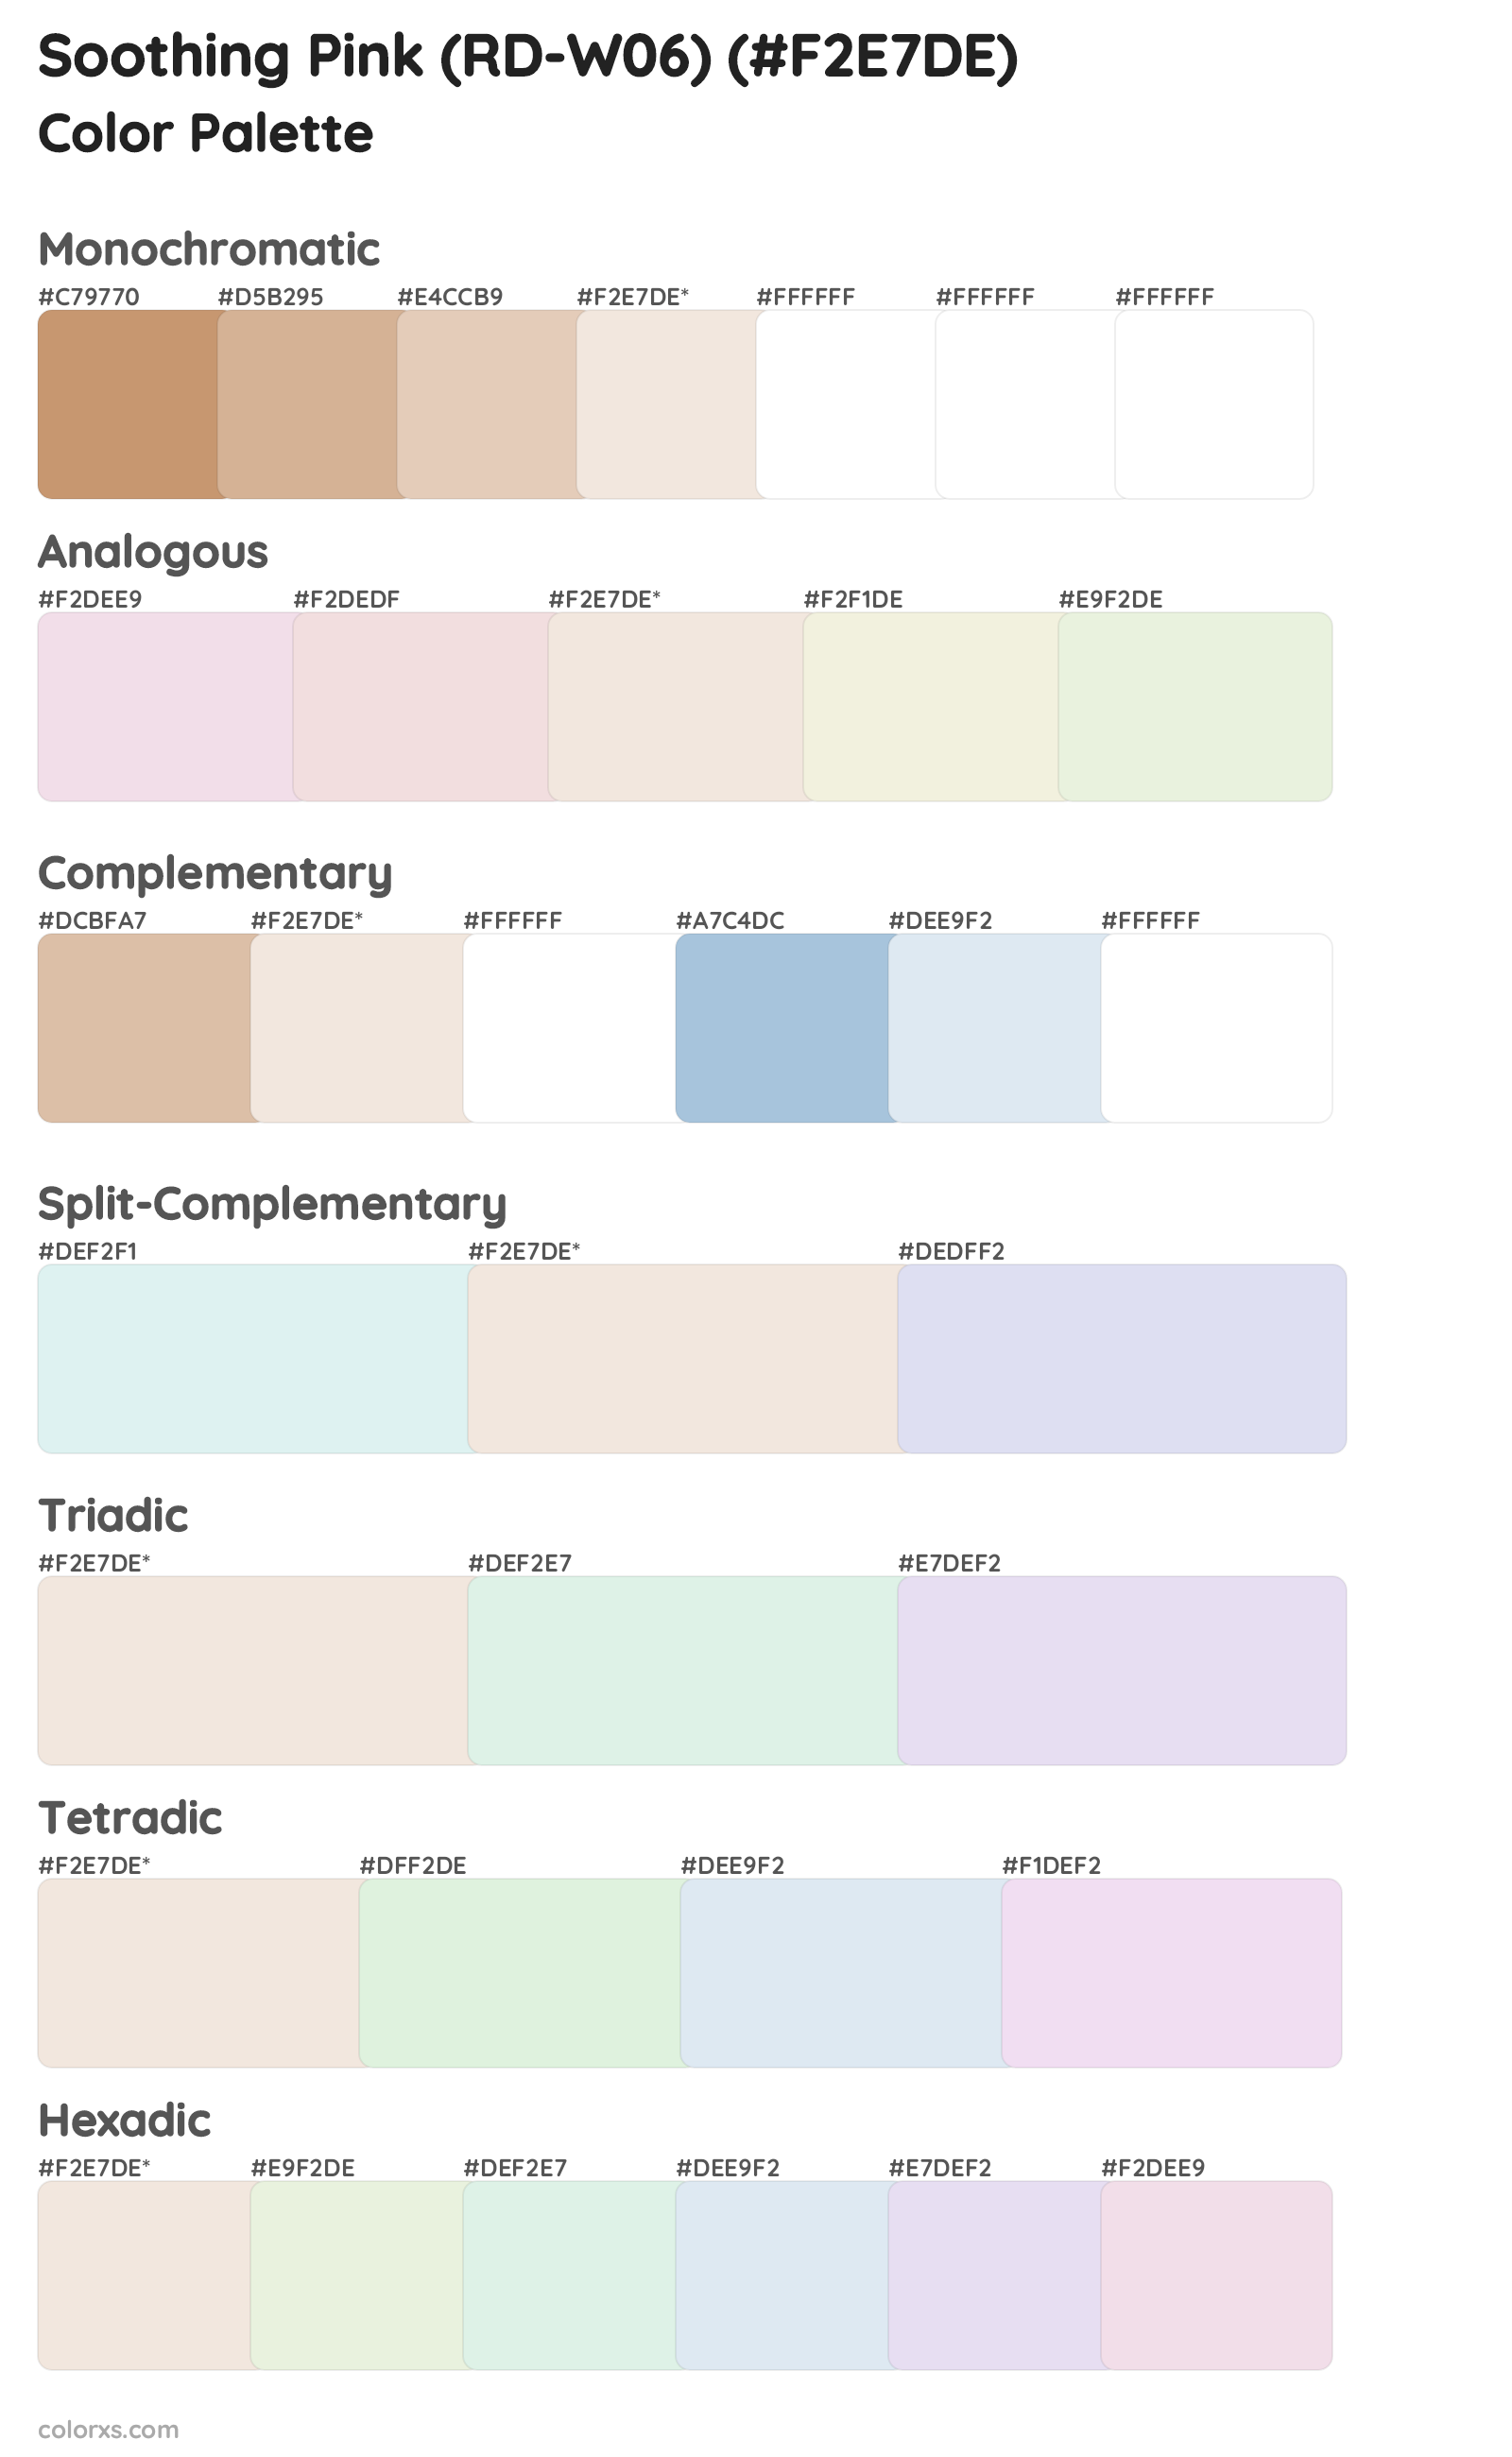 Soothing Pink (RD-W06) Color Scheme Palettes